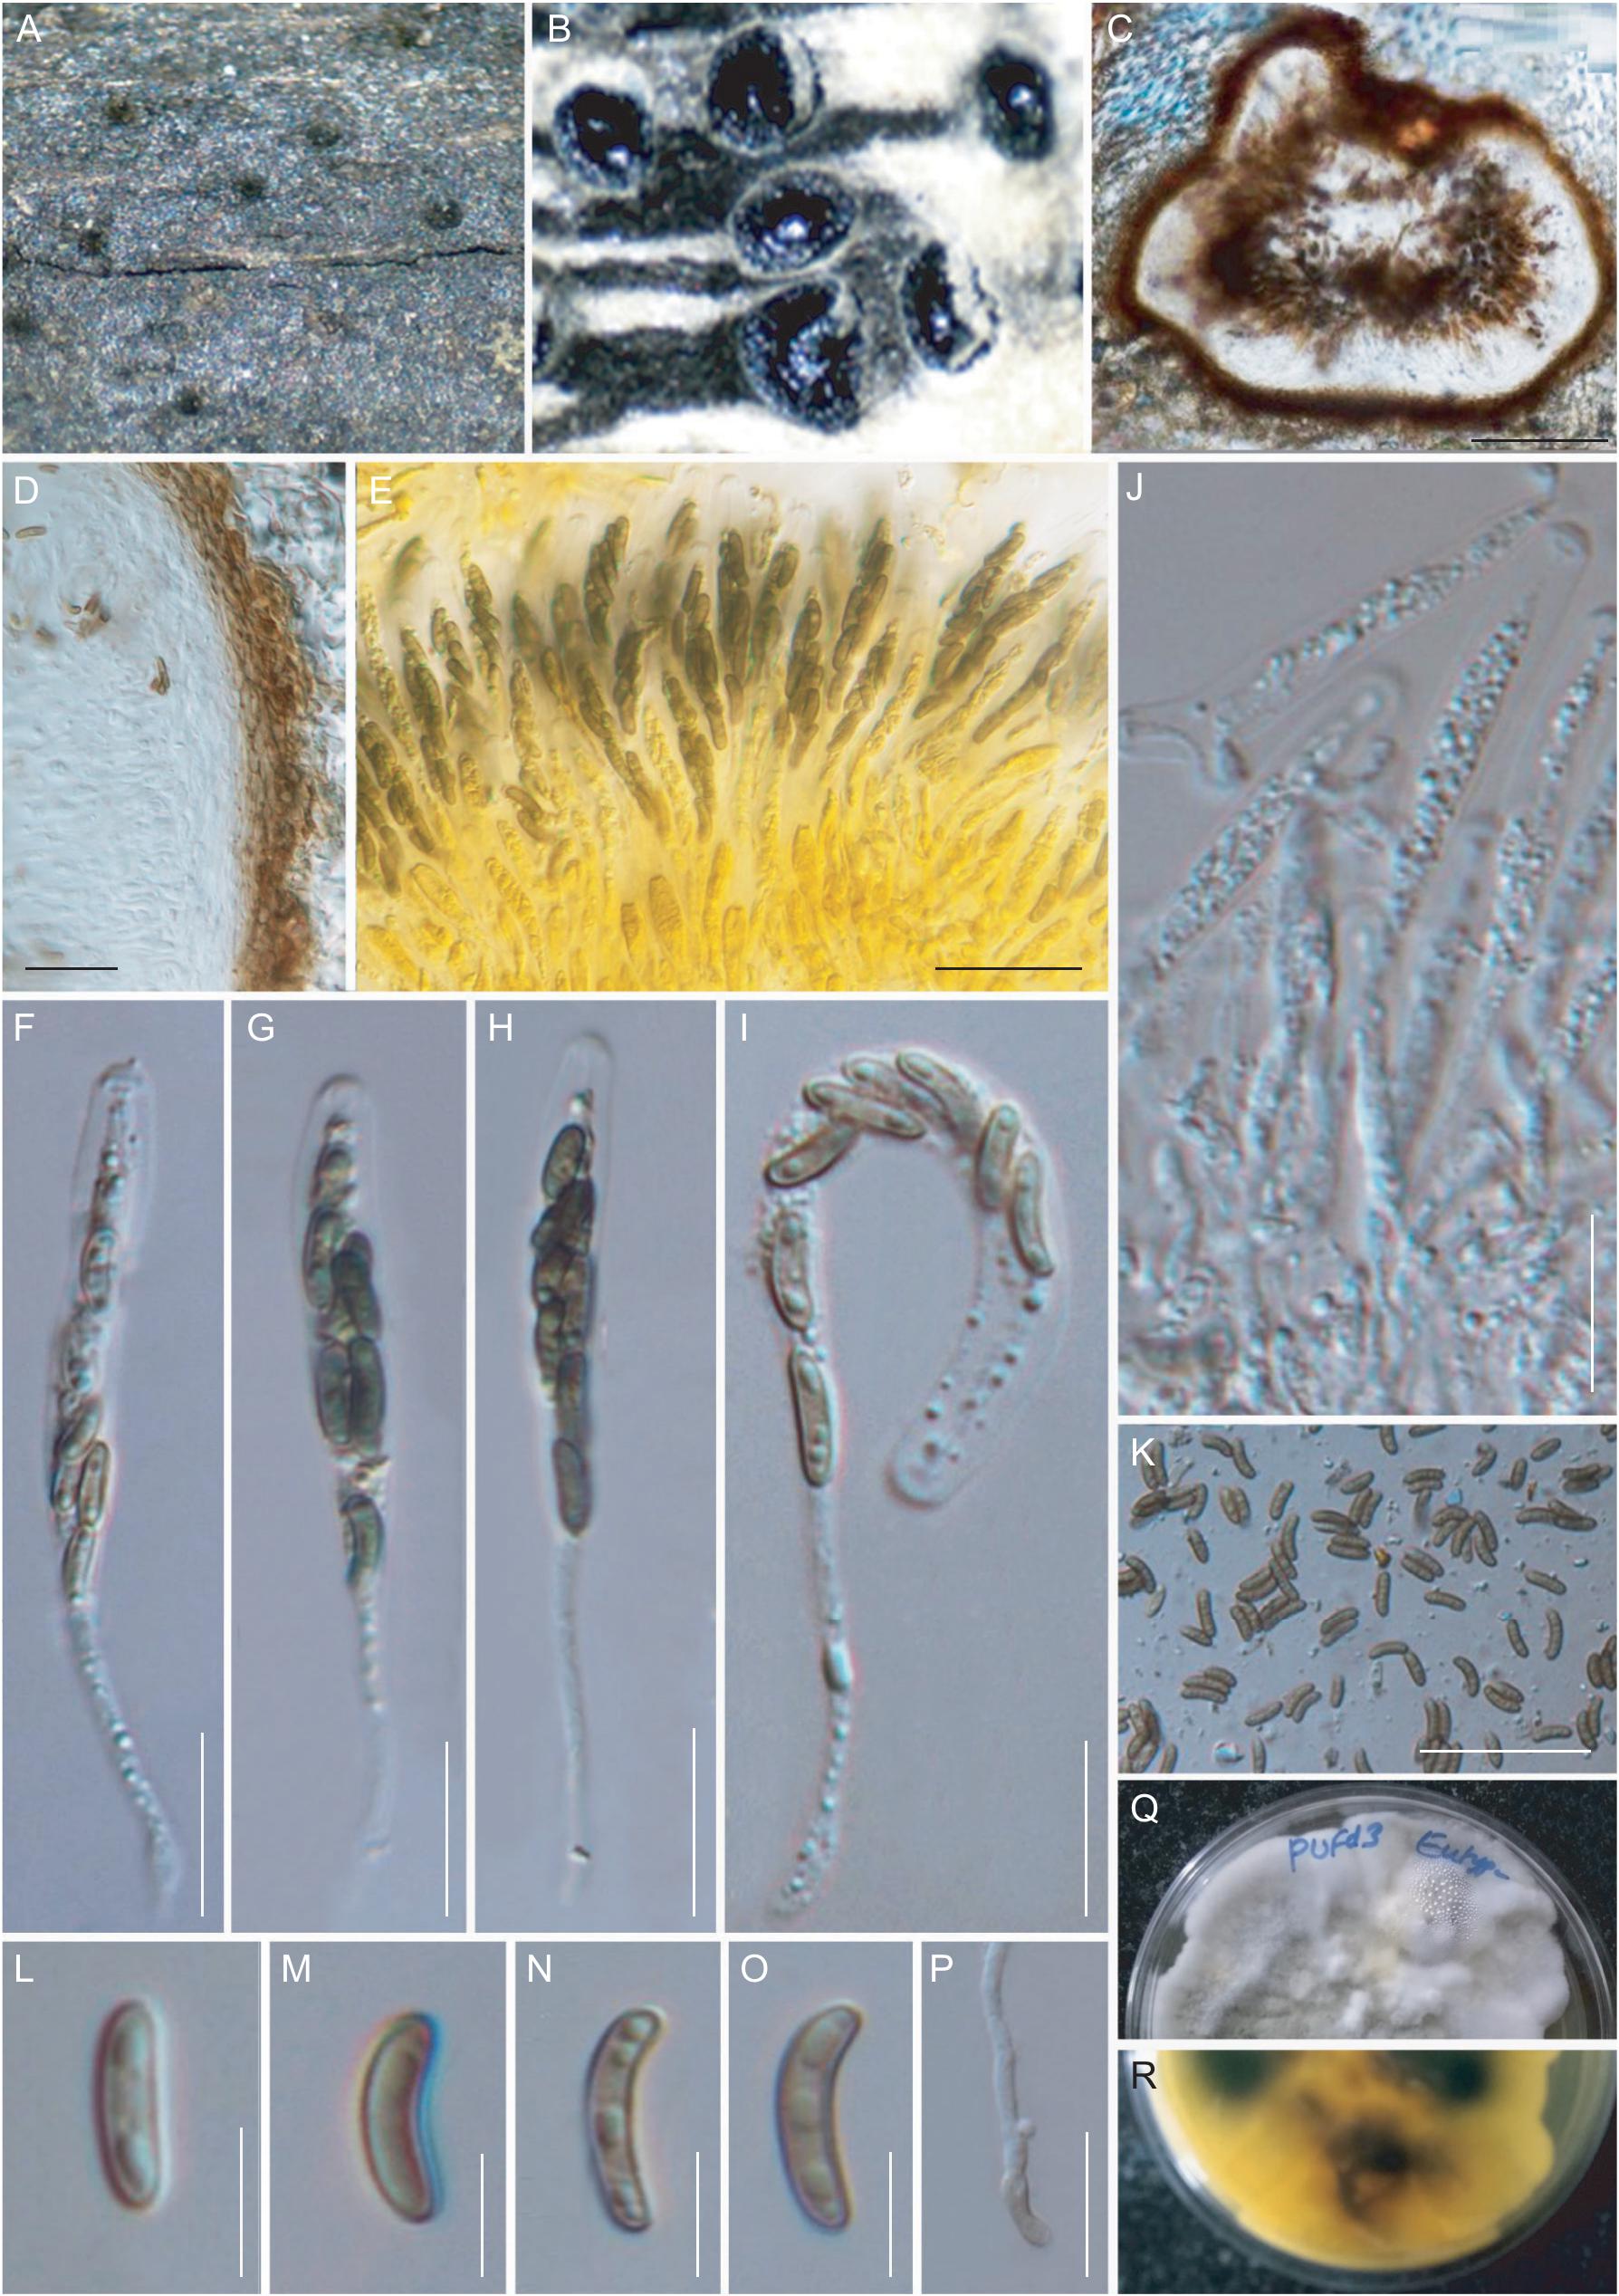 Modern Taxonomic Approaches To Identifying Diatrypaceous Fungi From Marine Habitats With A Novel Genus Halocryptovalsa Dayarathne K D Hyde Gen Nov